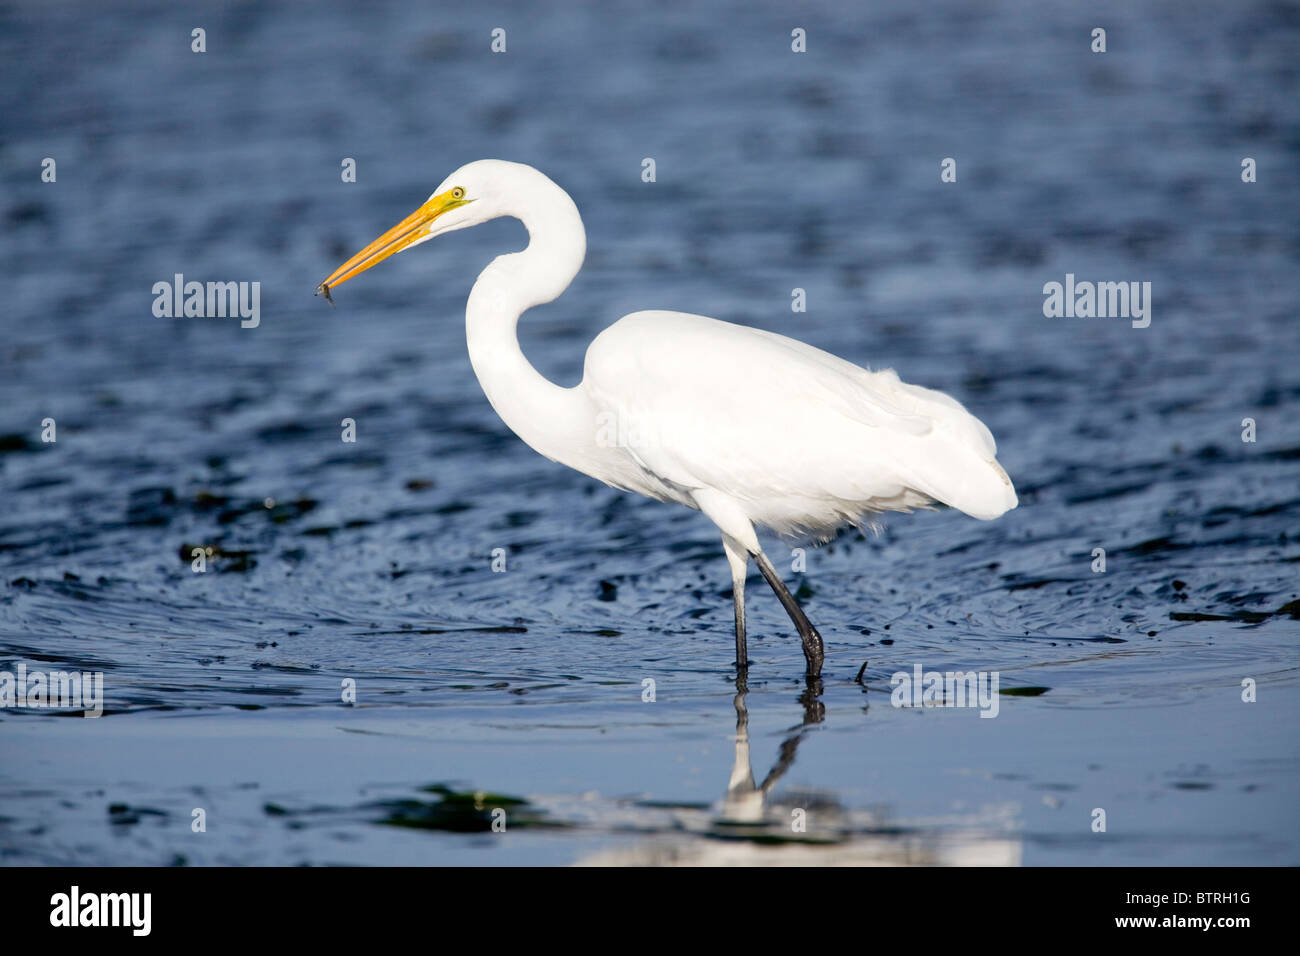 A great egret (Ardea alba) catches a small fish in Elkhorn Slough - Moss Landing, California. Stock Photo